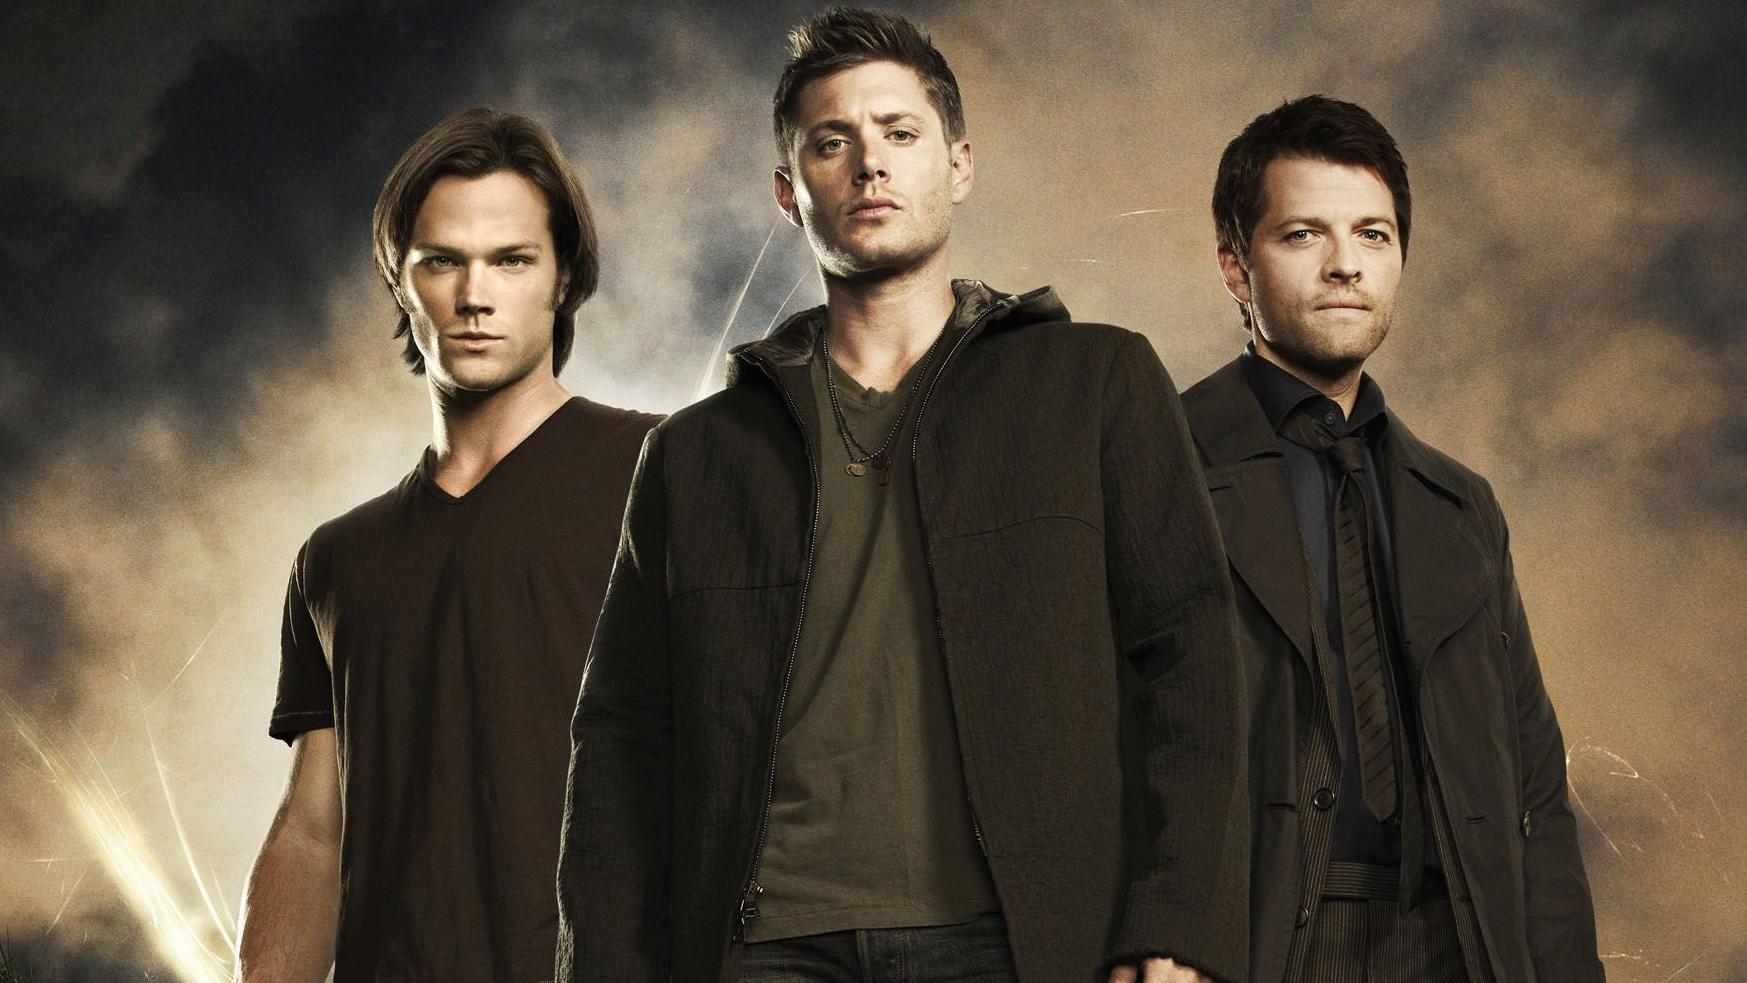 This Supernatural Character Is Now Officially Gay